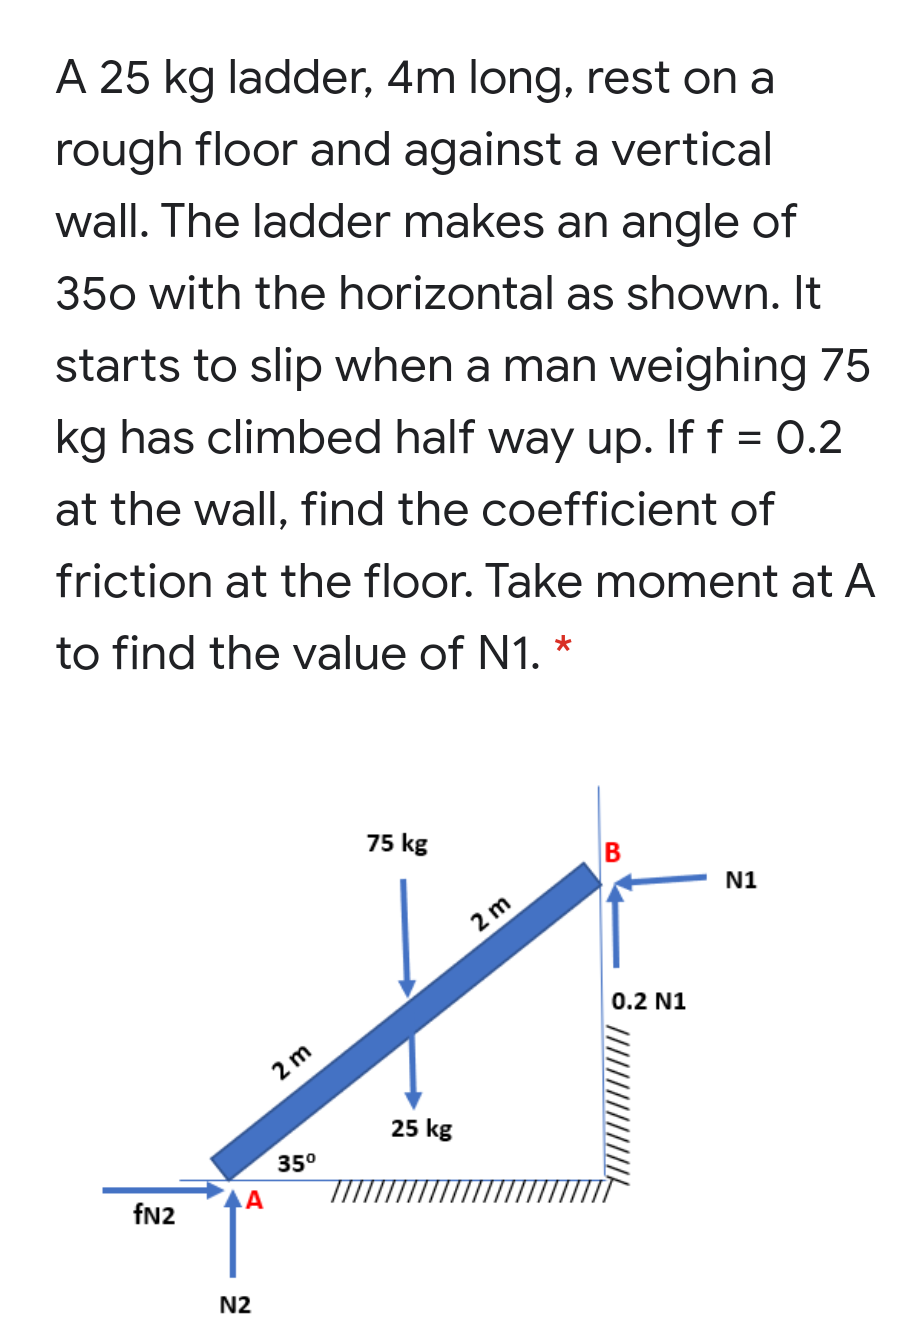 A 25 kg ladder, 4m long, rest on a
rough floor and against a vertical
wall. The ladder makes an angle of
350 with the horizontal as shown. It
starts to slip when a man weighing 75
kg has climbed half way up. If f = 0.2
at the wall, find the coefficient of
friction at the floor. Take moment at A
to find the value of N1. *
75 kg
N1
2 m
0.2 N1
2 m
25 kg
35°
fn2
N2
B
